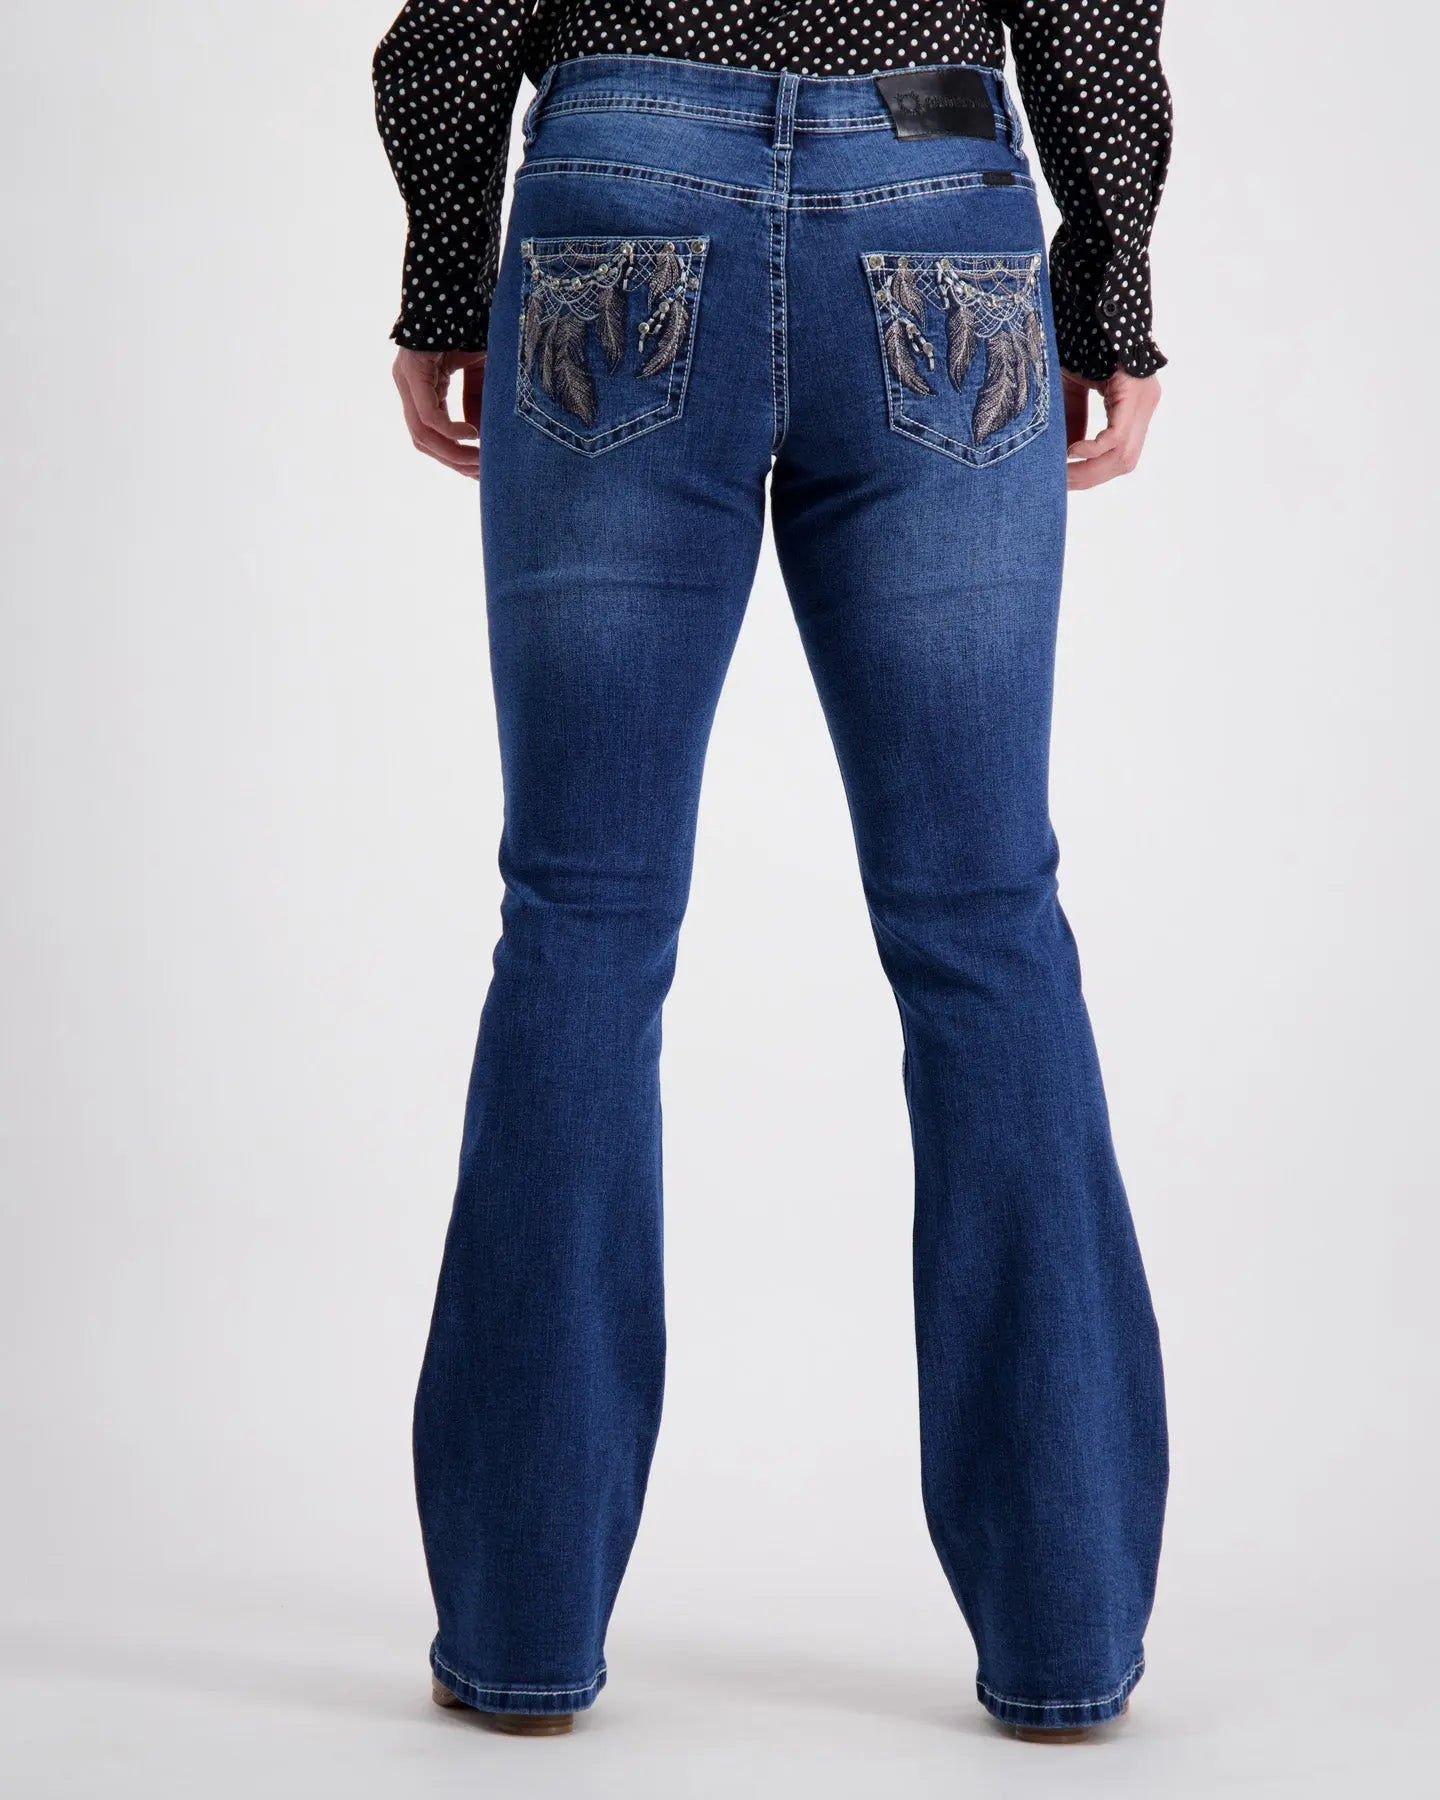 Dreamcatcher Boot-Cut Jeans Slimming Hips Outback Supply Co